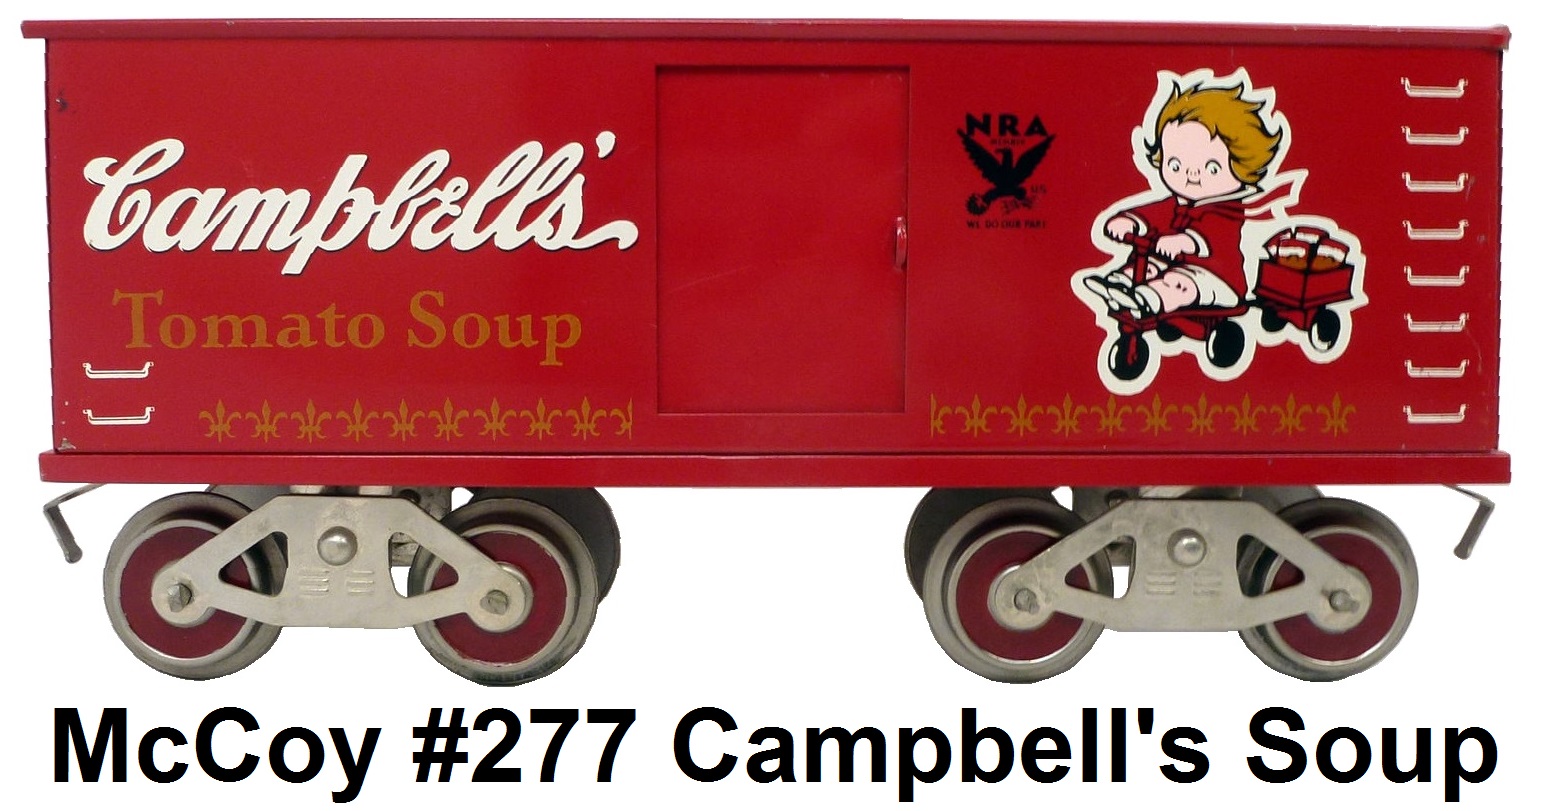 McCoy #277 Campbell's Tomato Soup Standard gauge box car with NRA logo first made in 1974